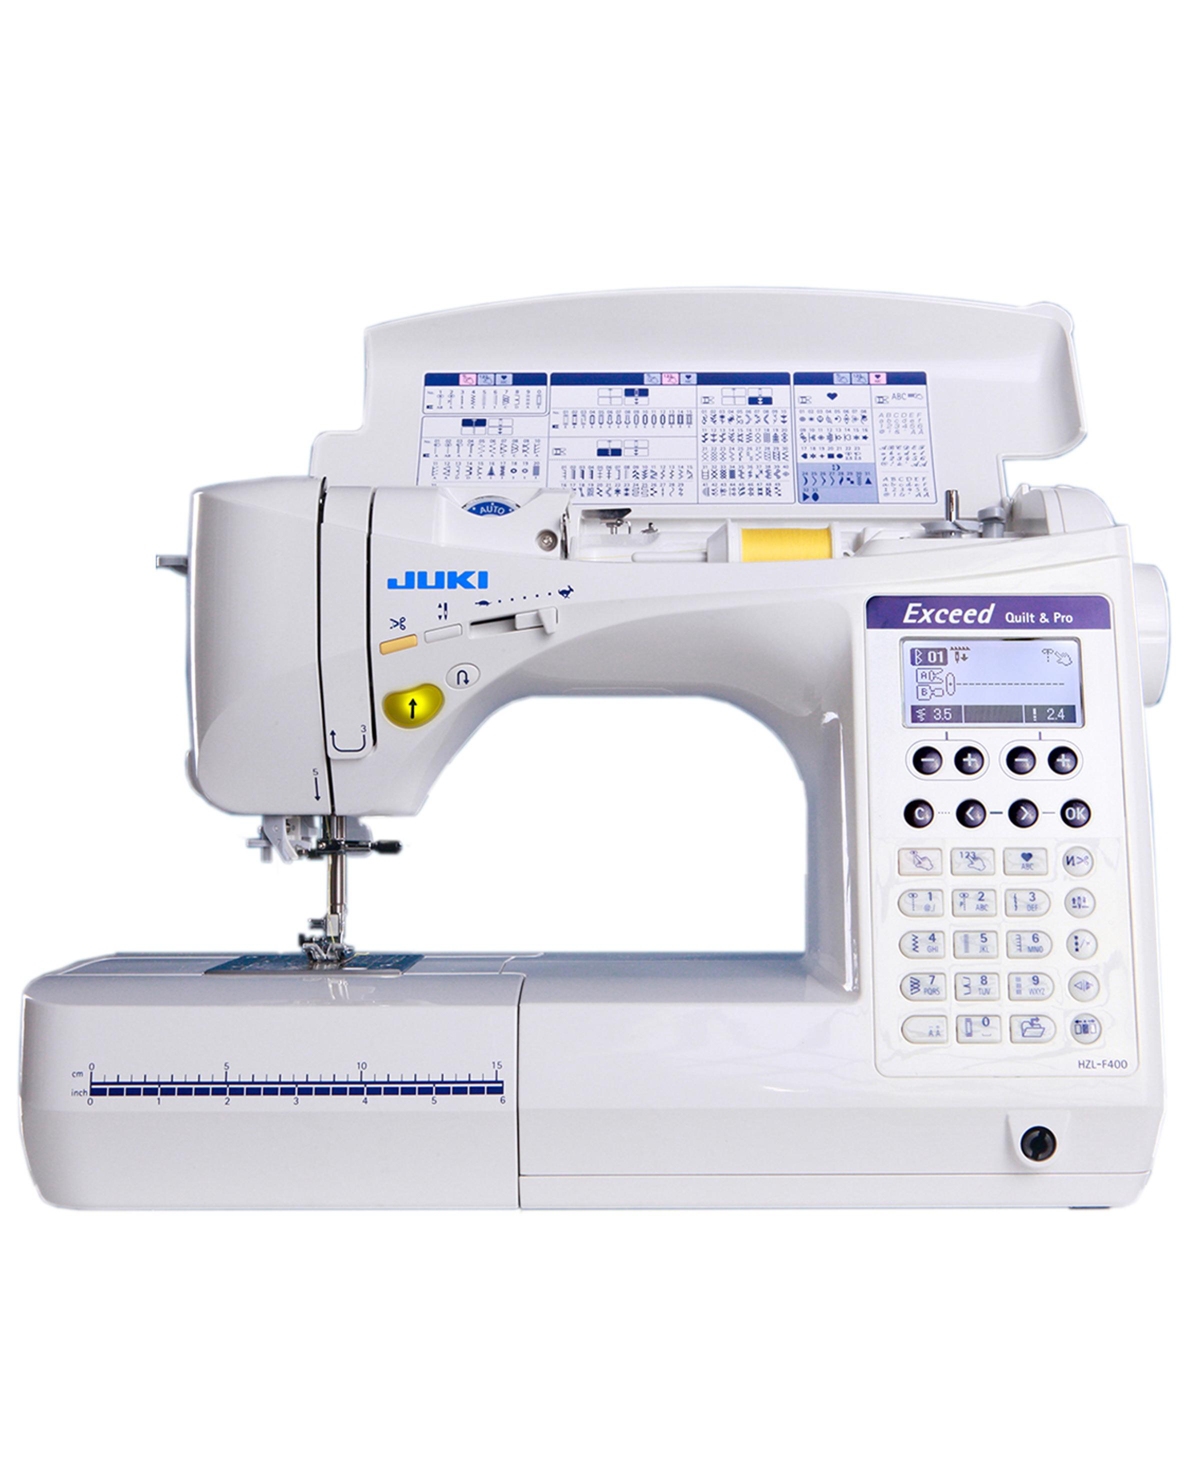 Hzl-F400 Computerized Sewing and Quilting Machine - White